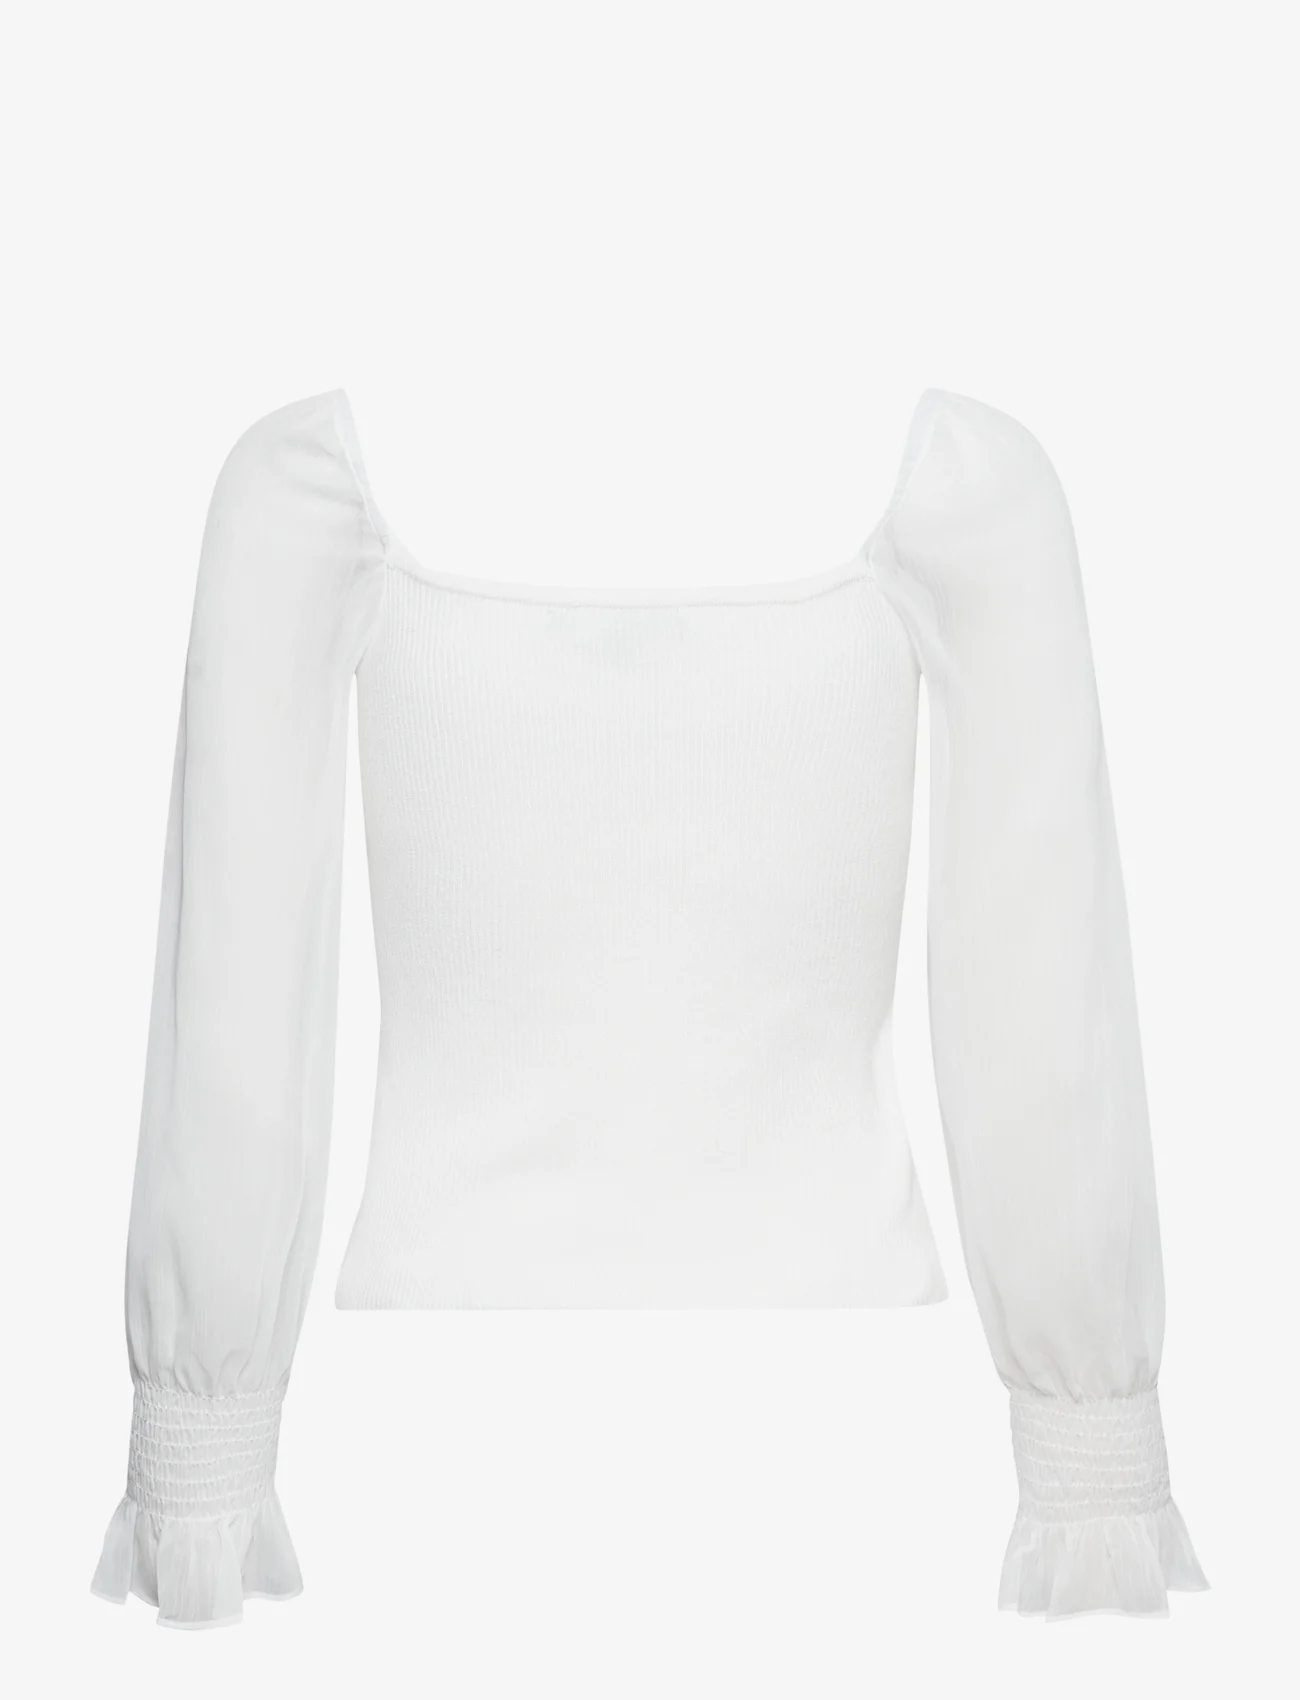 French Connection - MAIA KRISTA CREPE MIX JUMPER - pullover - summer white - 1